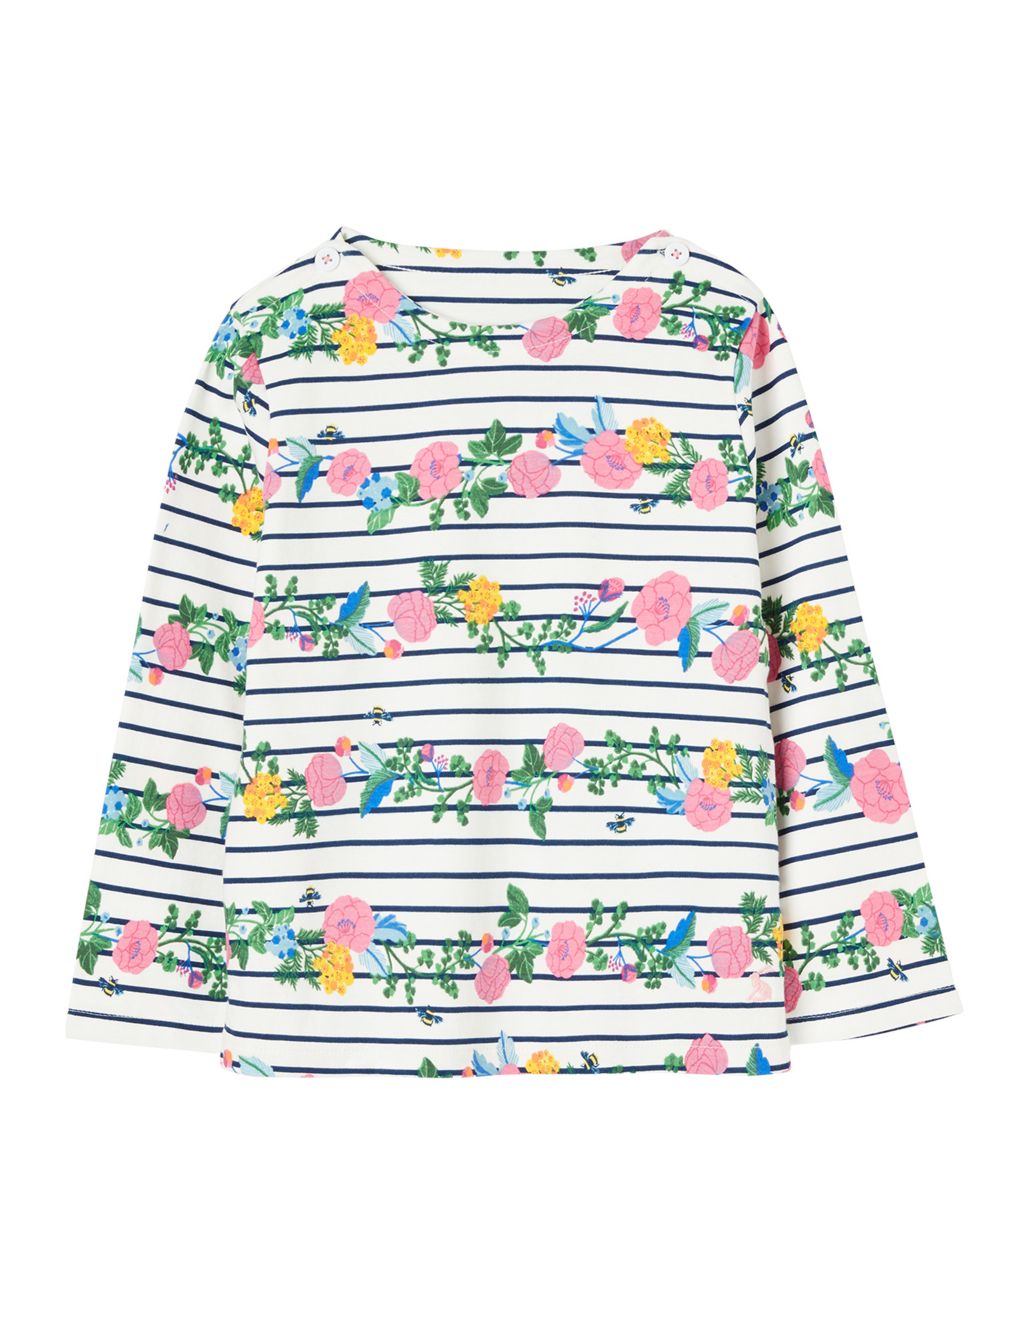 Pure Cotton Floral Striped Top (2-12 Yrs) image 1